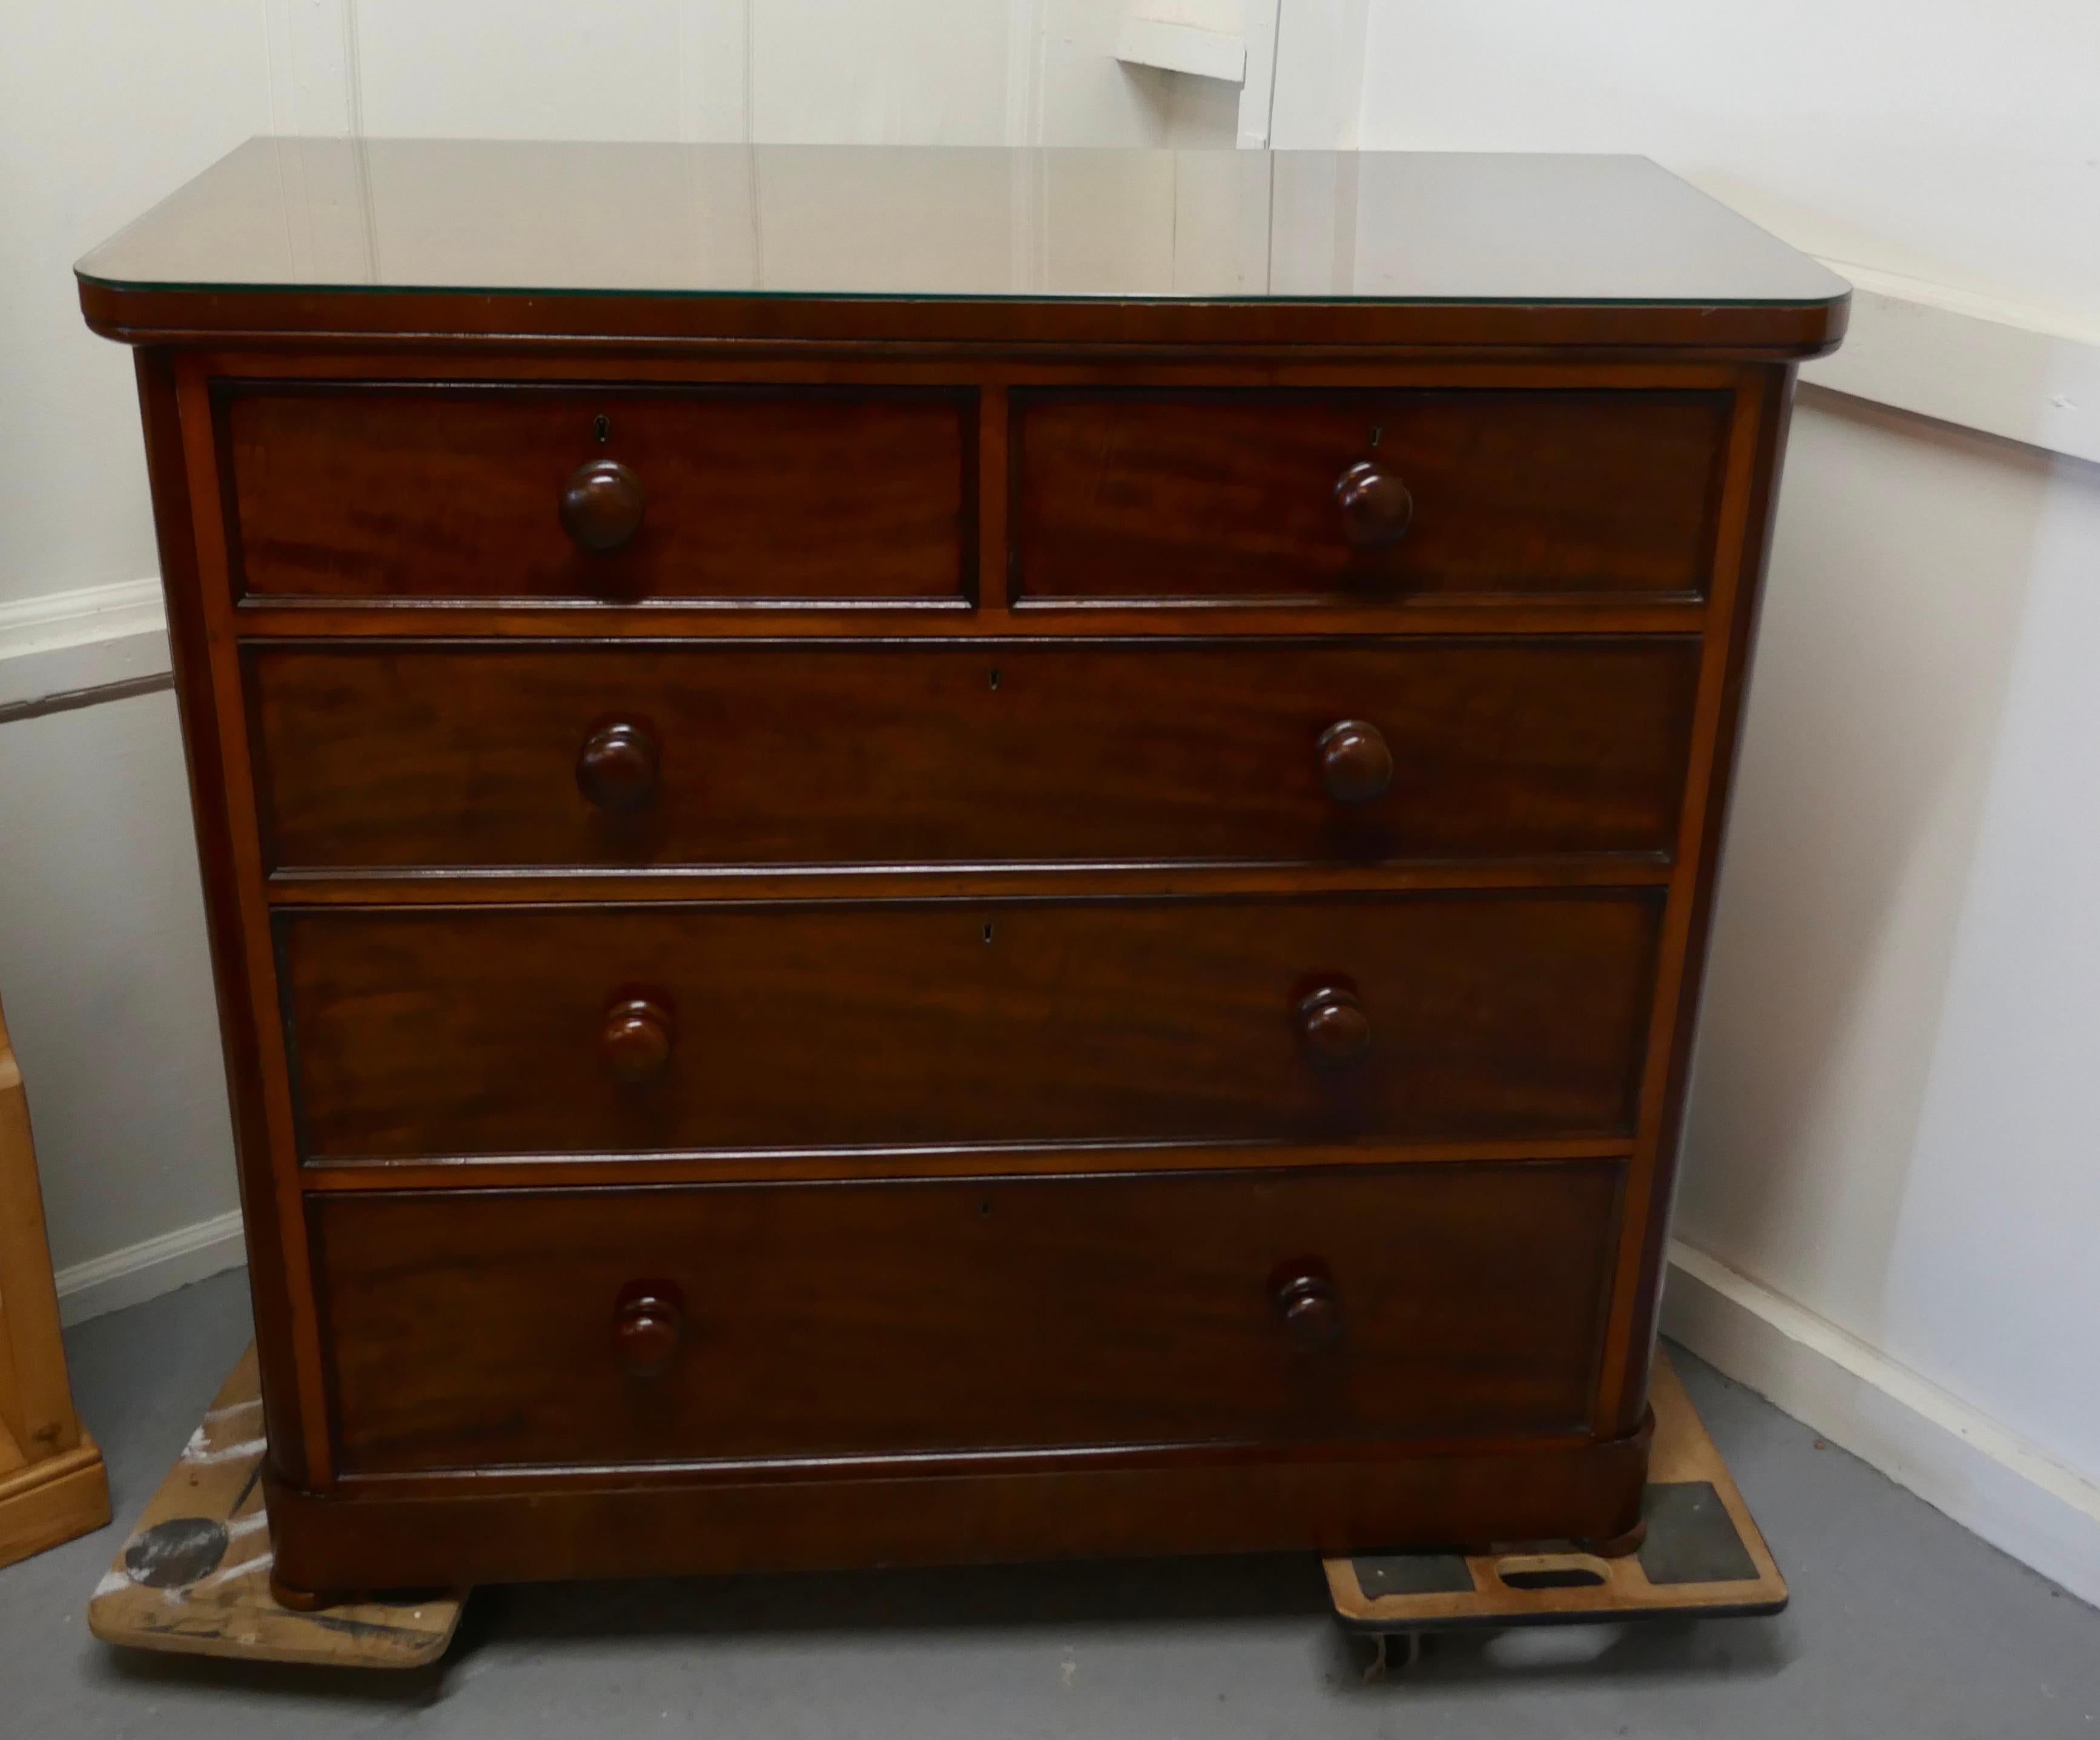 Large Victorian mahogany chest of drawers

Victorian mahogany chest of drawers, with a deep mahogany top, the chest has 2 short over 3 graduated drawers, and has a plate glass cover which has protected the finish on the top, very useful

The